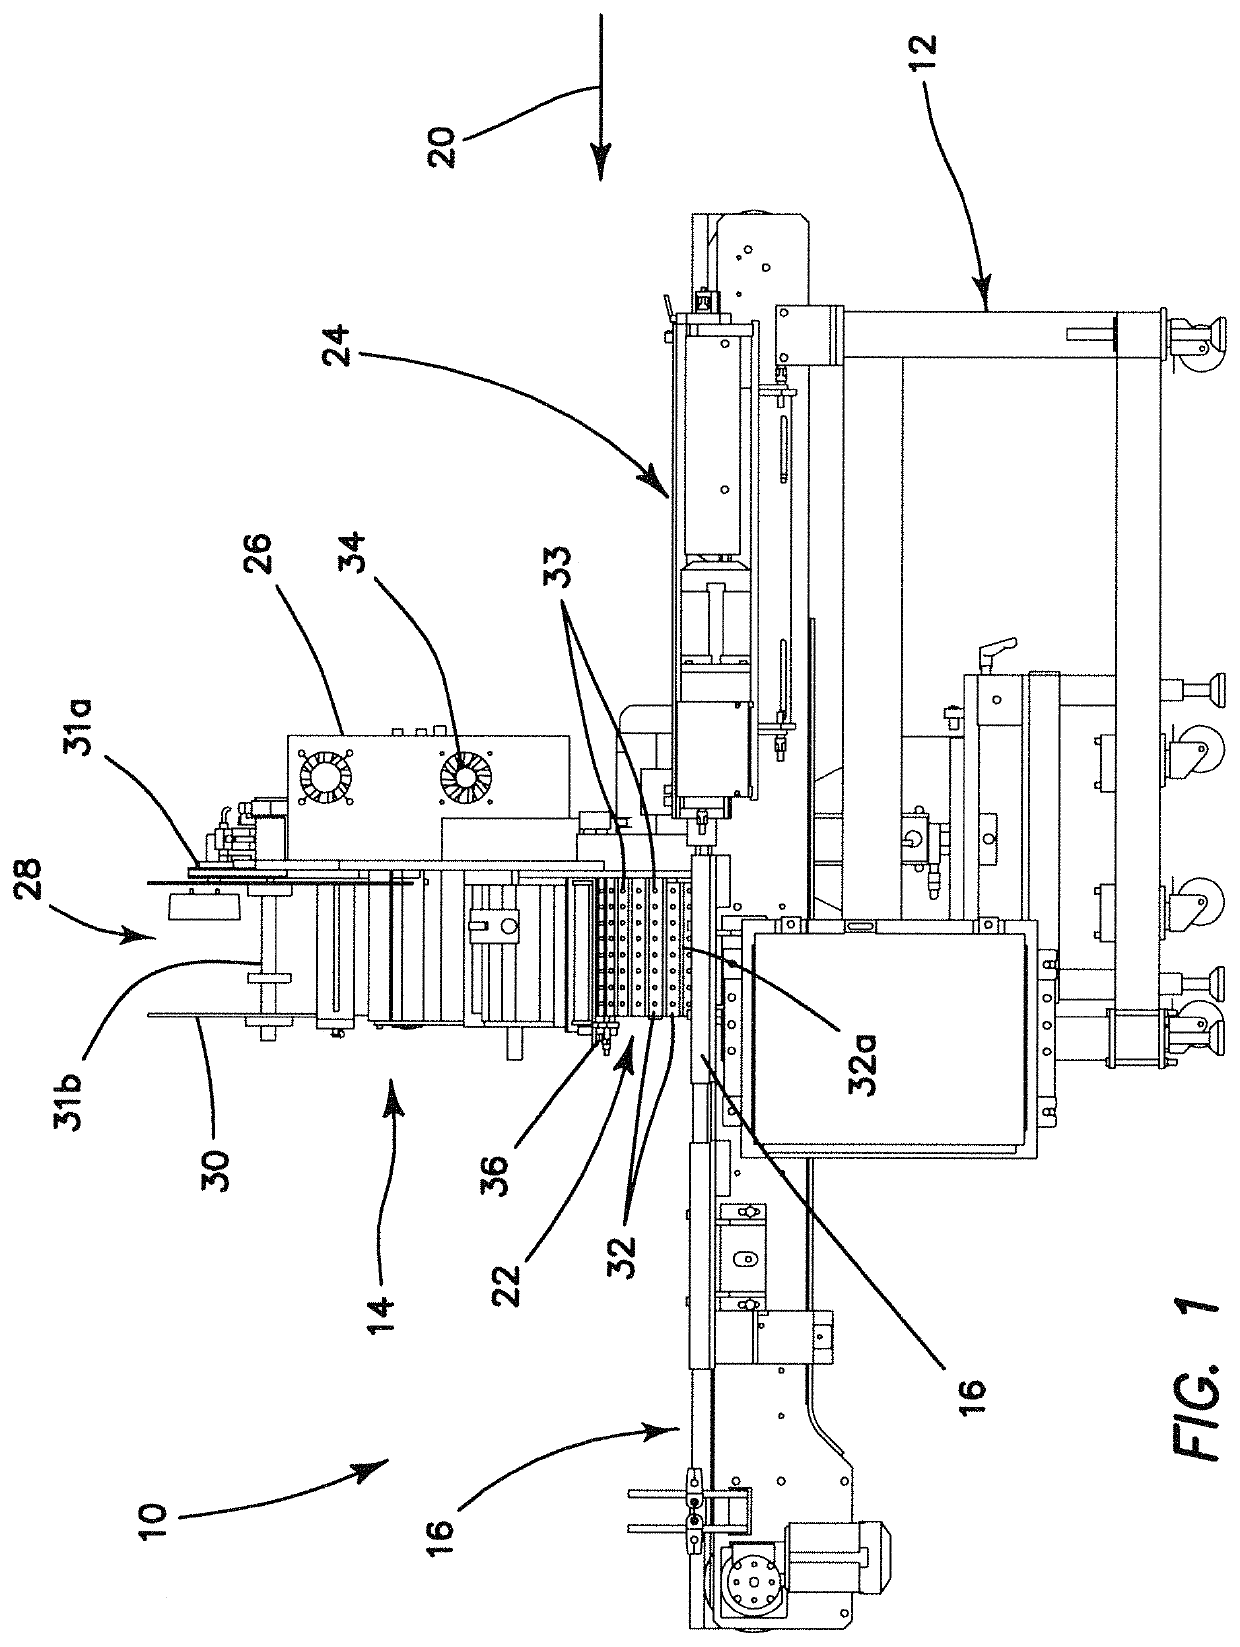 High speed label applicator systems and methods